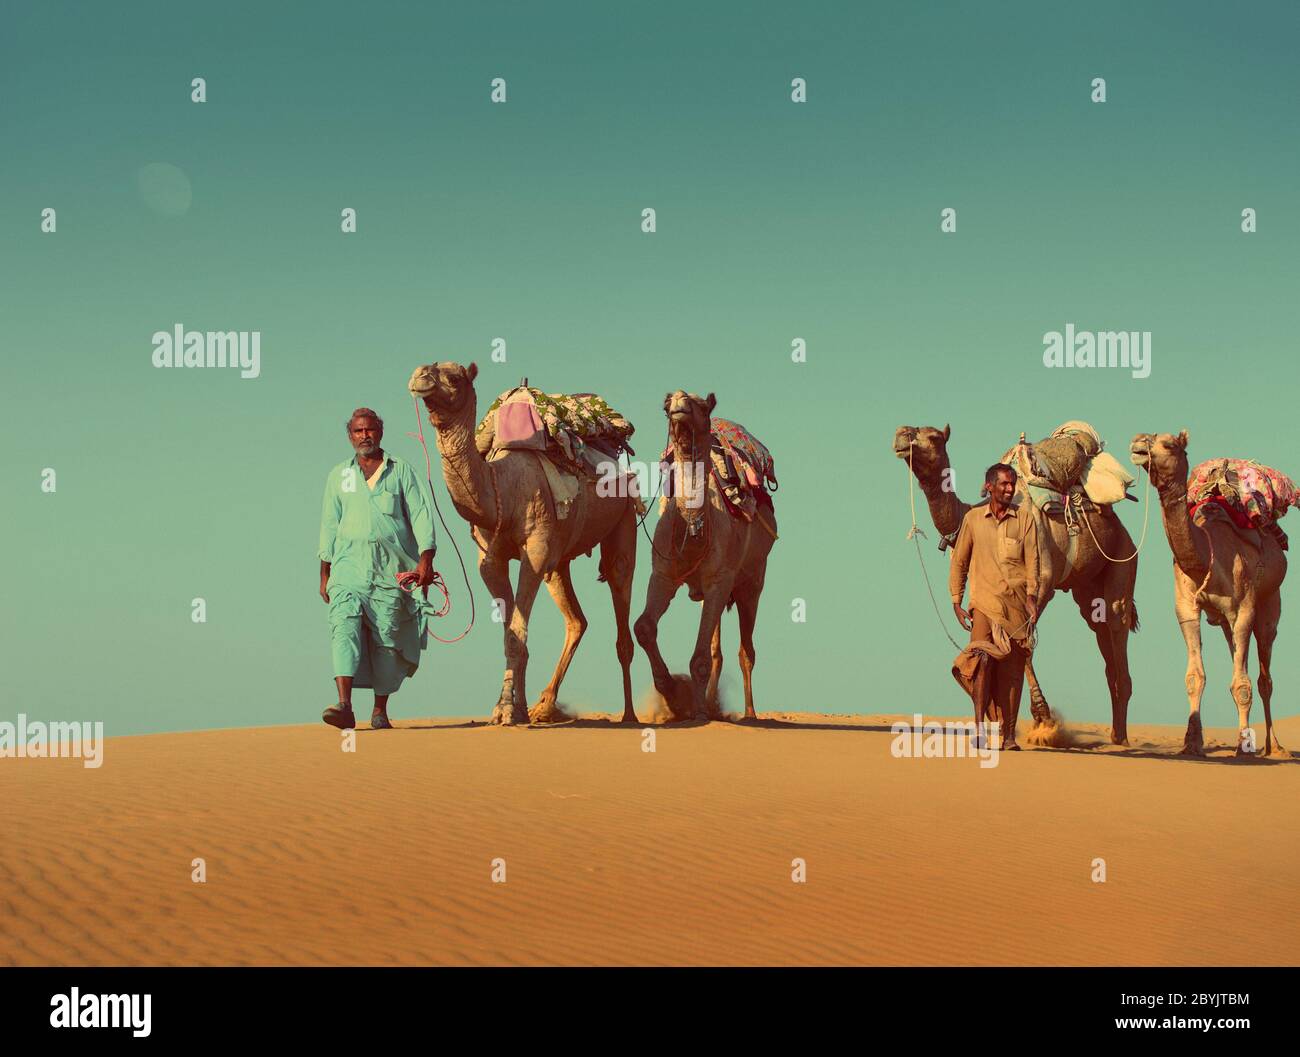 cameleers with camels in desert  - vintage retro style Stock Photo